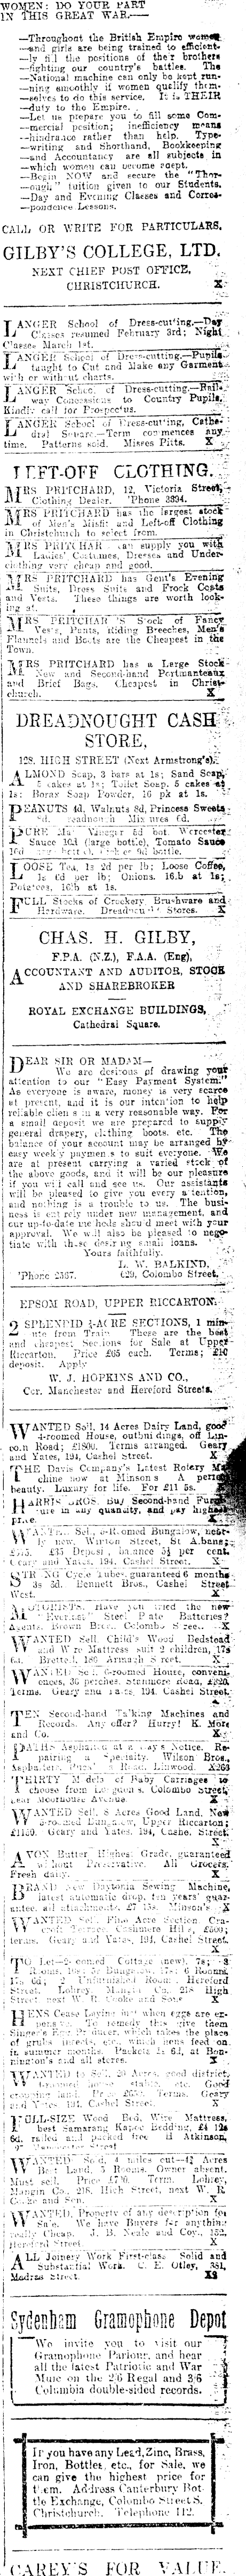 Papers Past Newspapers Star Christchurch 10 September 1915 Page 7 Advertisements Column 3